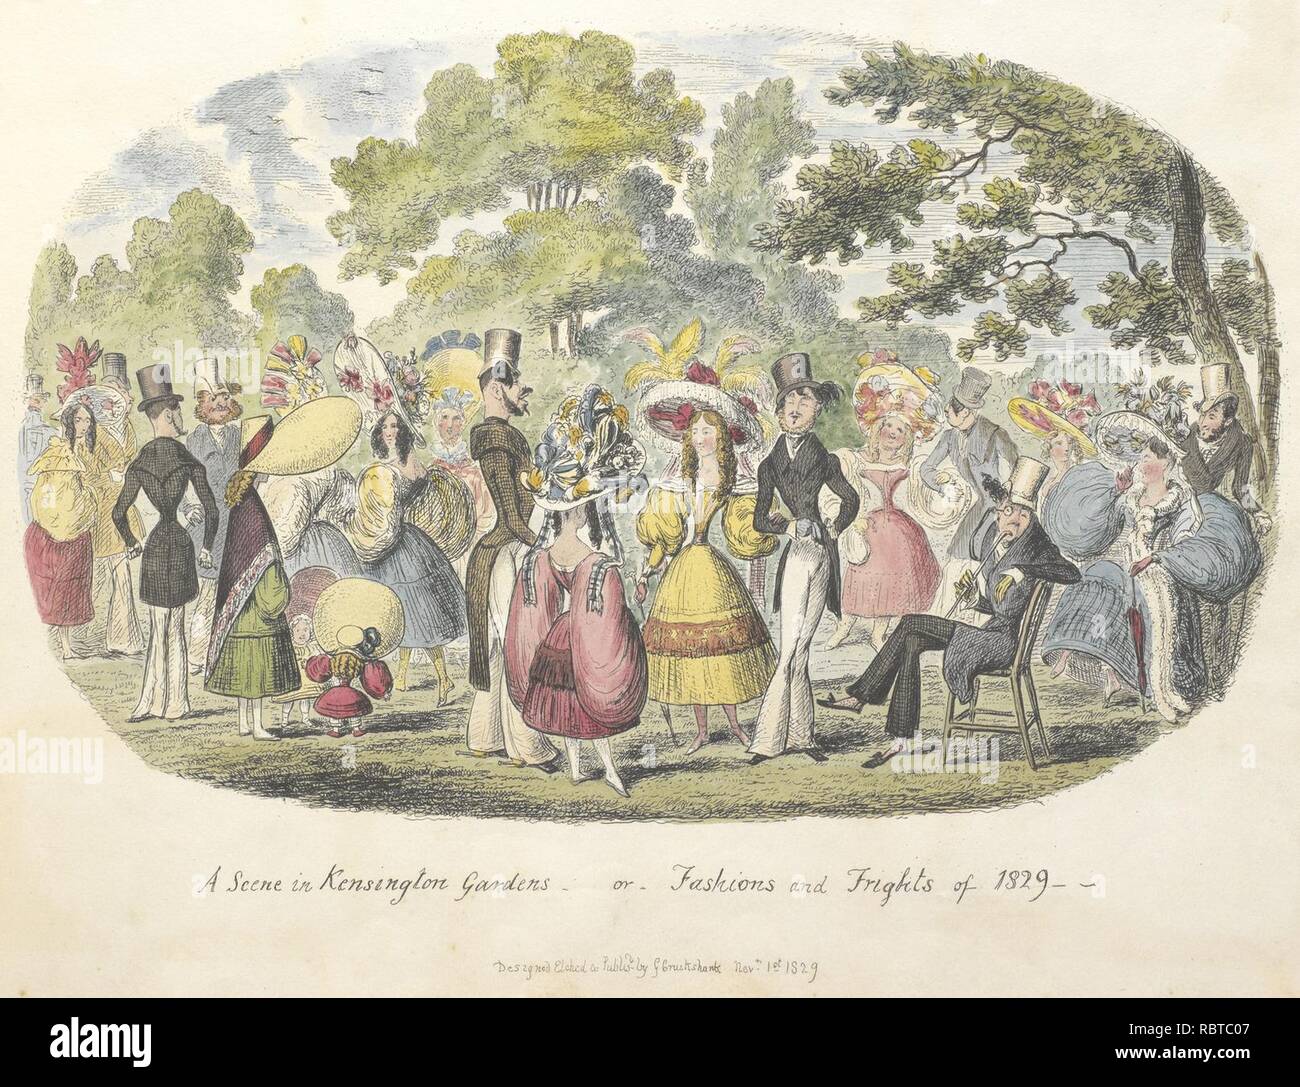 A scene in Kensington Gardens, or fashion and frights of 1829 - Cruikshank, Scraps and sketches (1829), f.8 - BL. Stock Photo